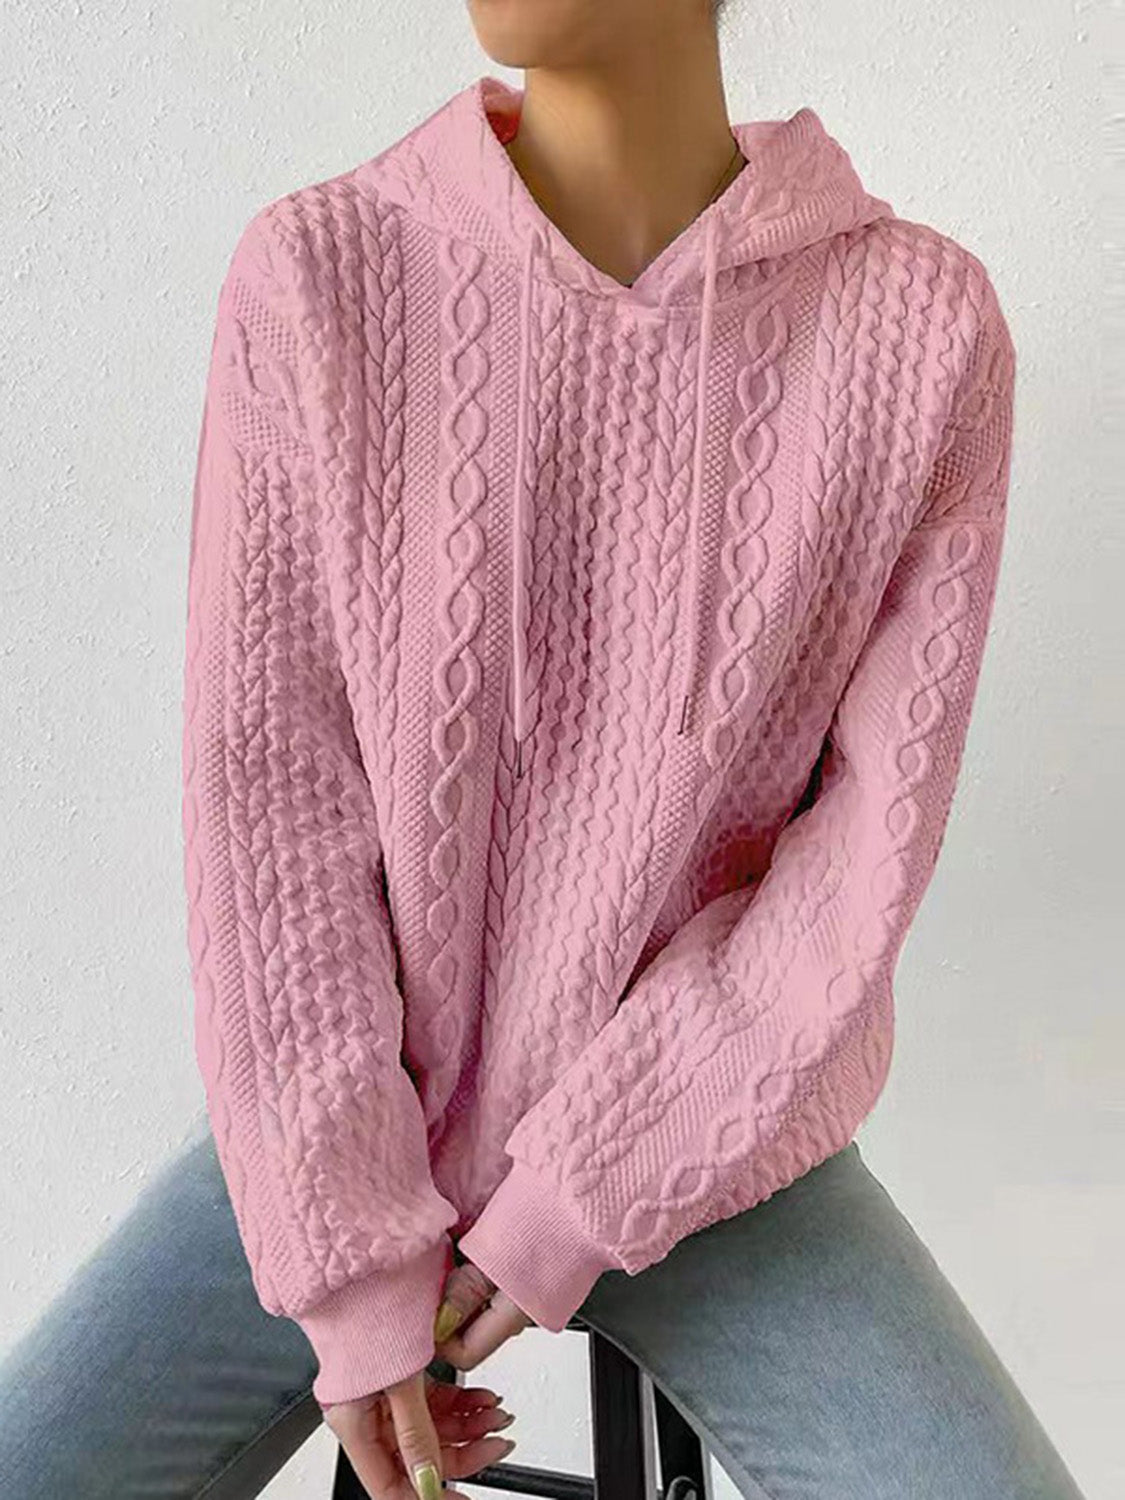 Textured Drawstring Long Sleeve Hoodie - Pink / S - Women’s Clothing & Accessories - Shirts & Tops - 10 - 2024